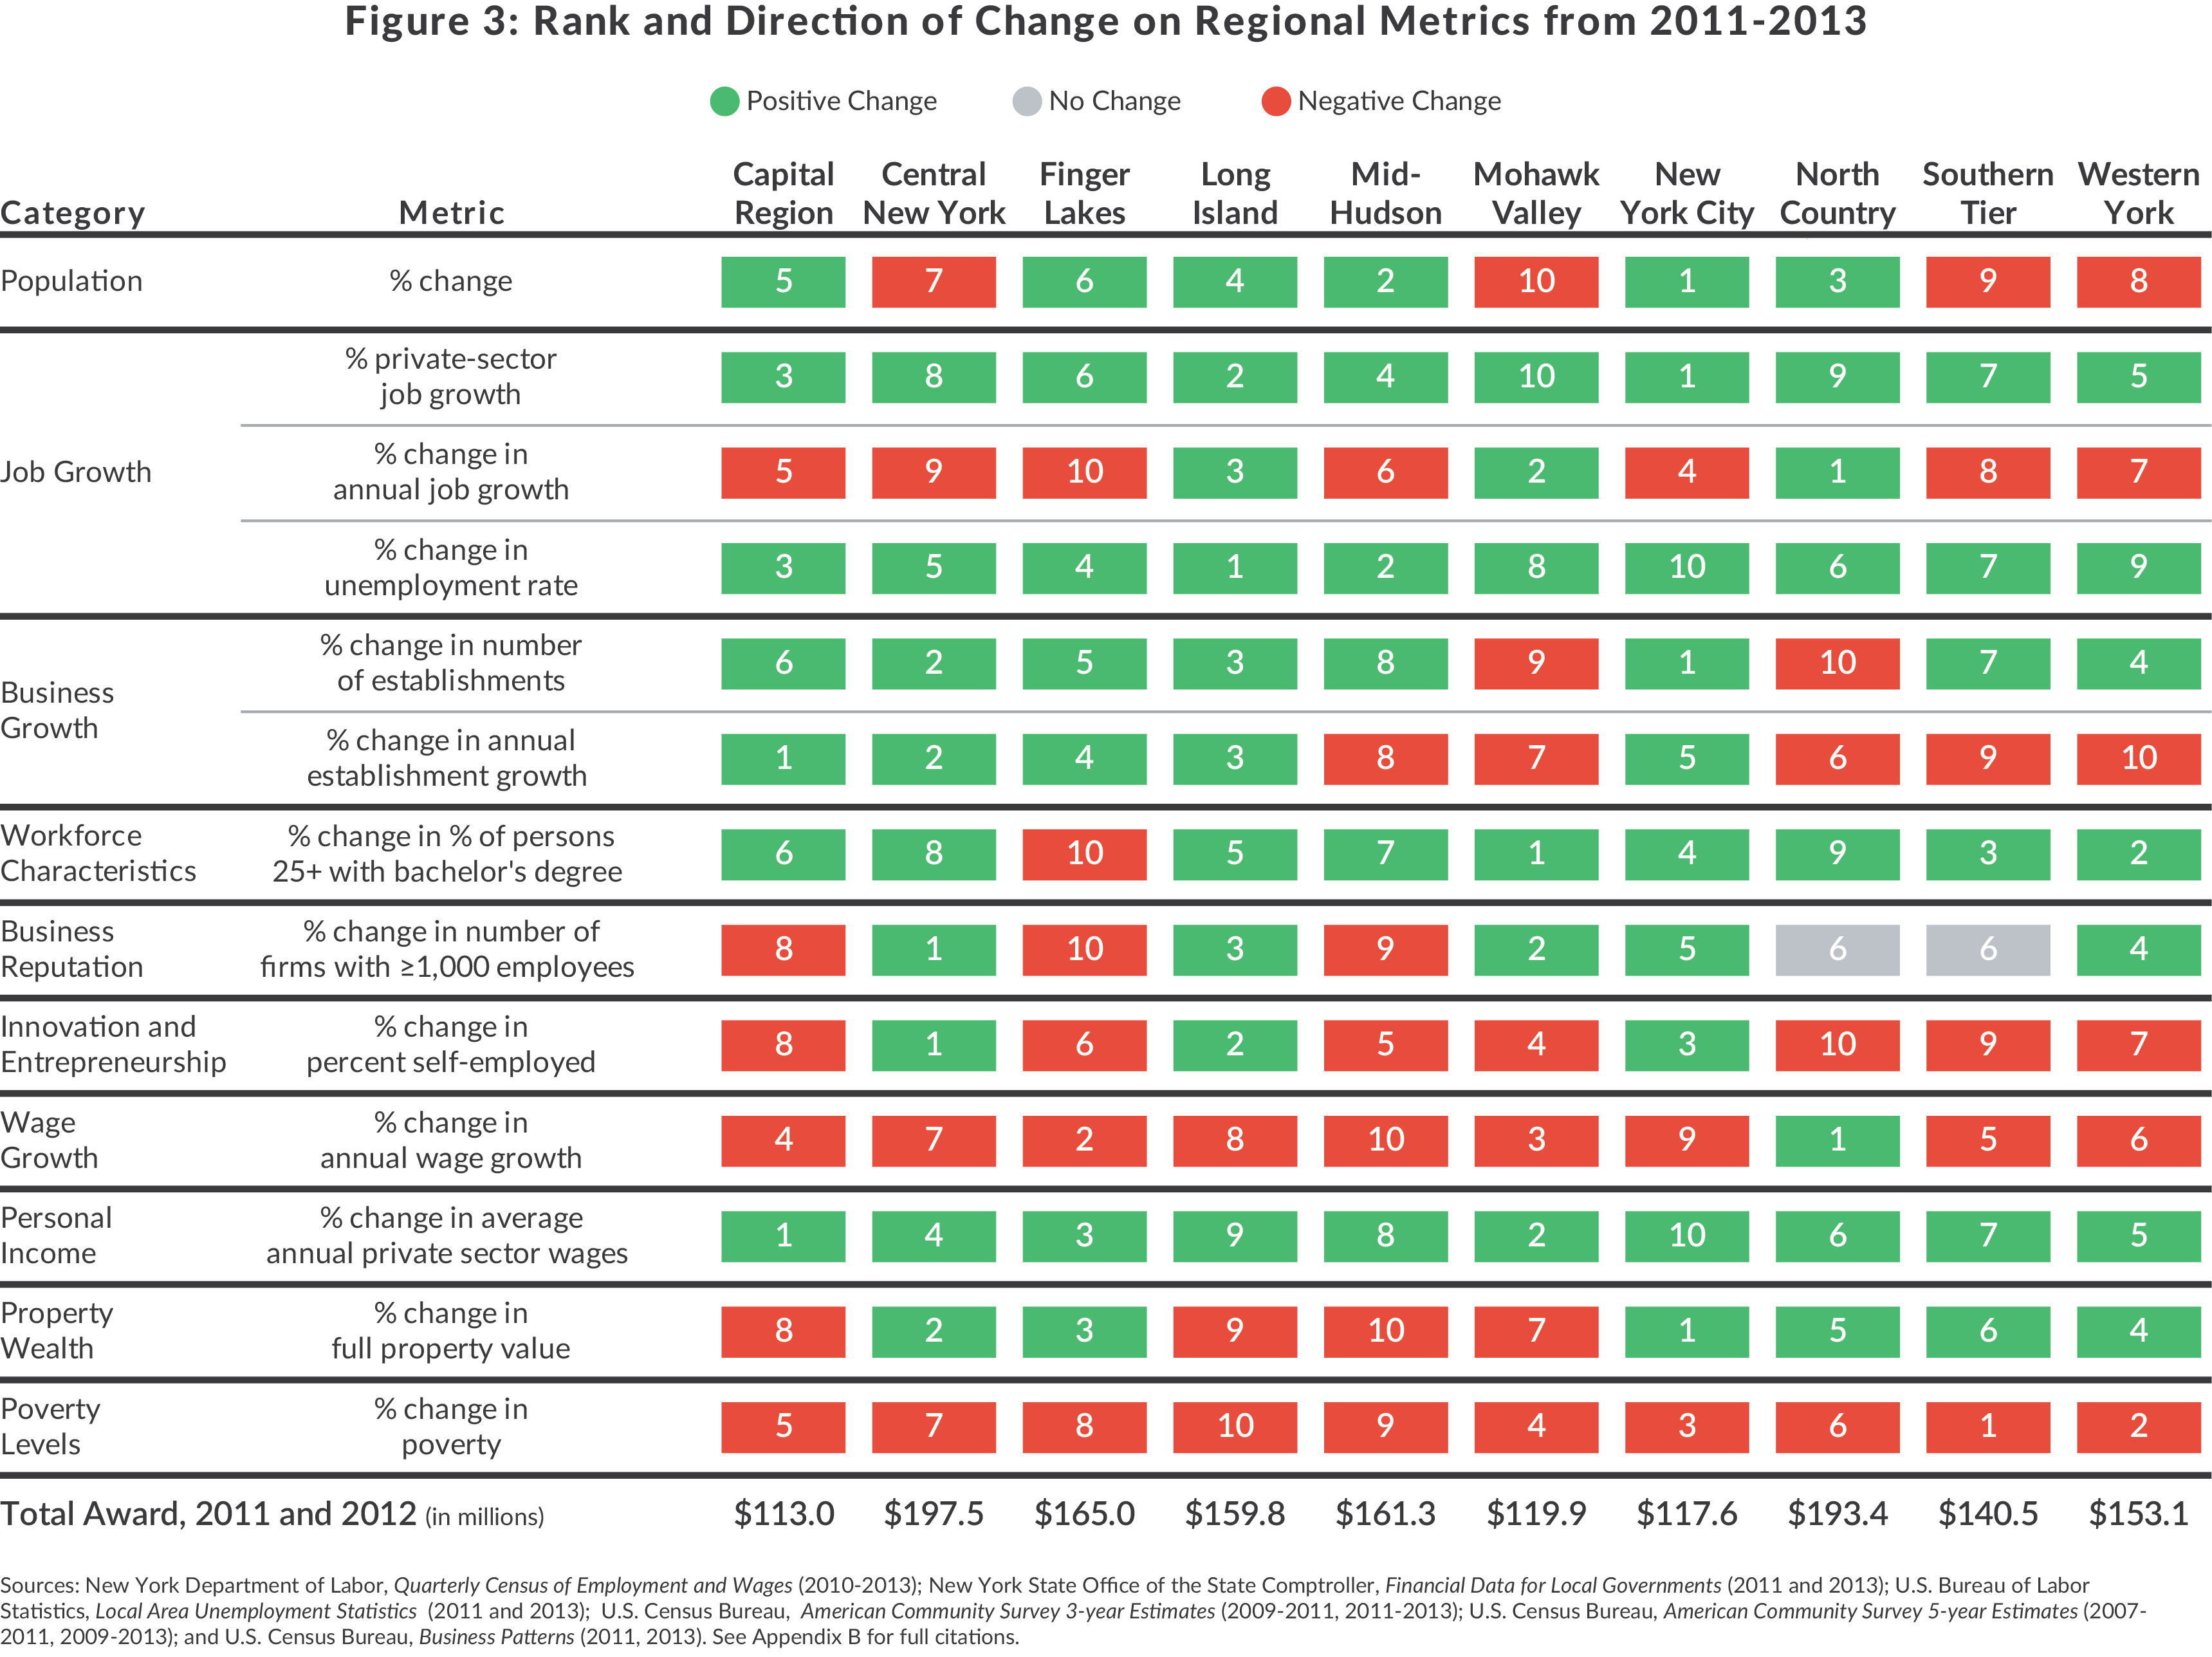 Figure with rank and direction of change for regional metrics by Regional Economic Development Councils, 2011 to 2013